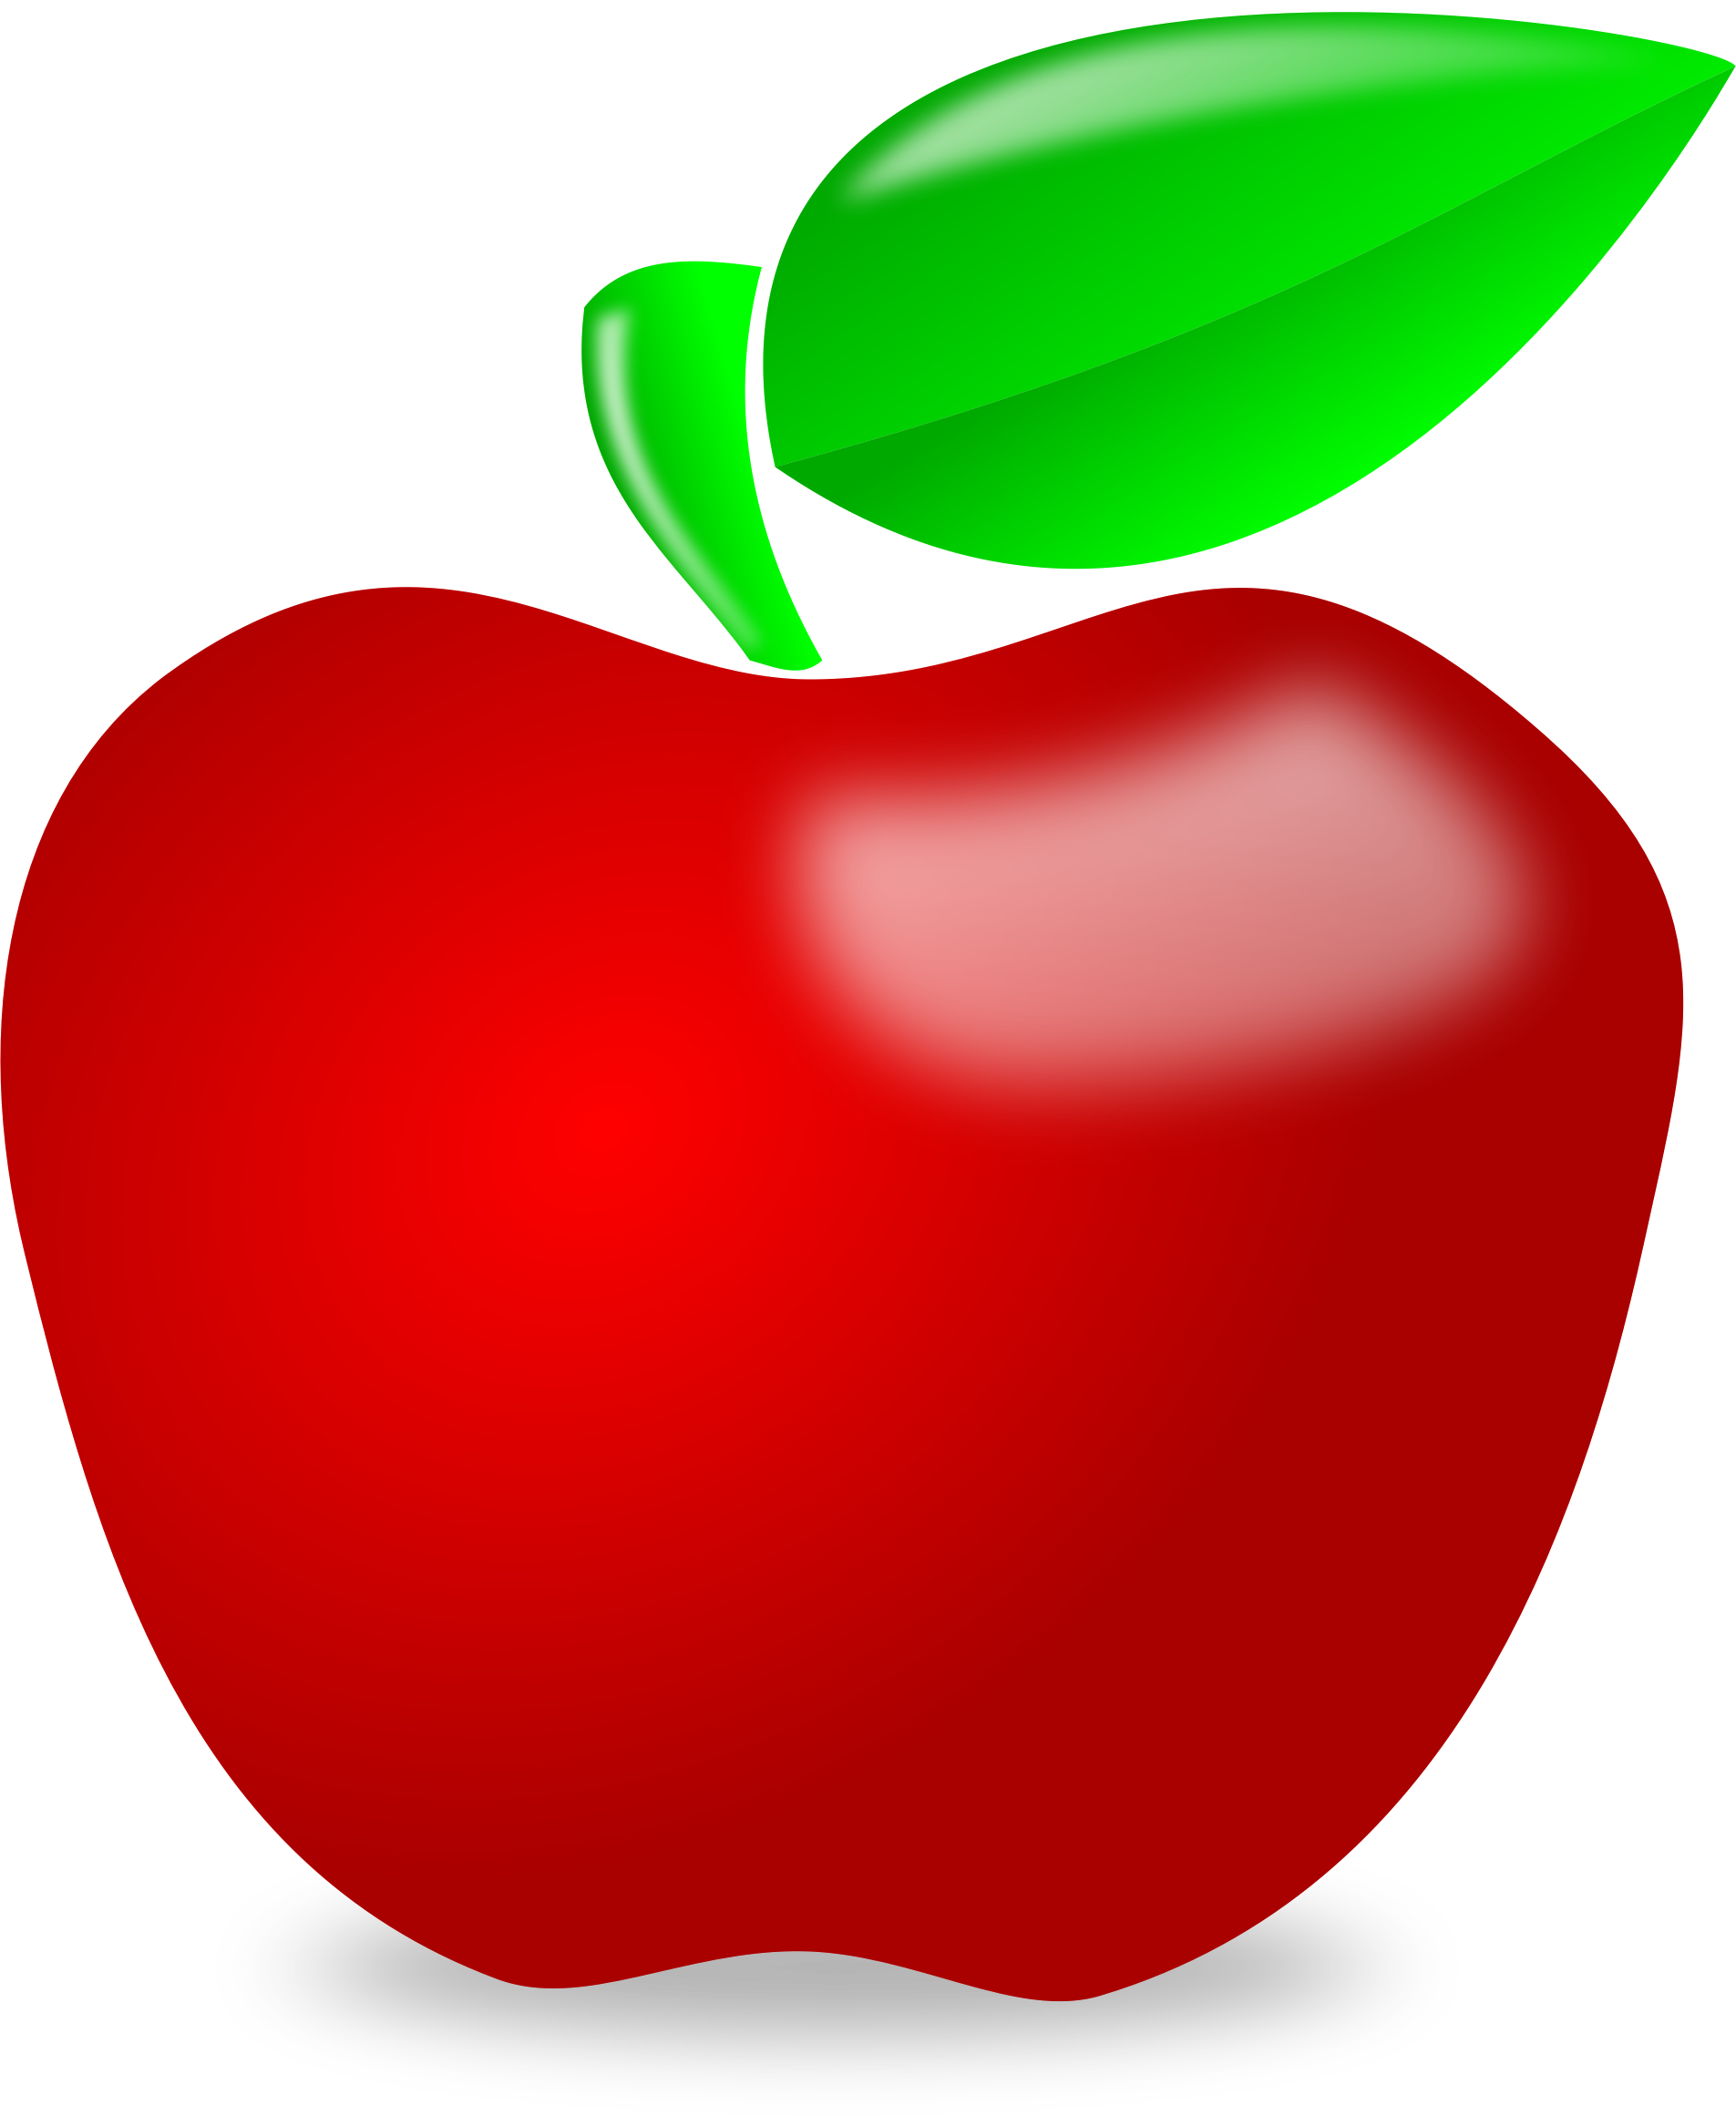 apple clipart png - photo #27